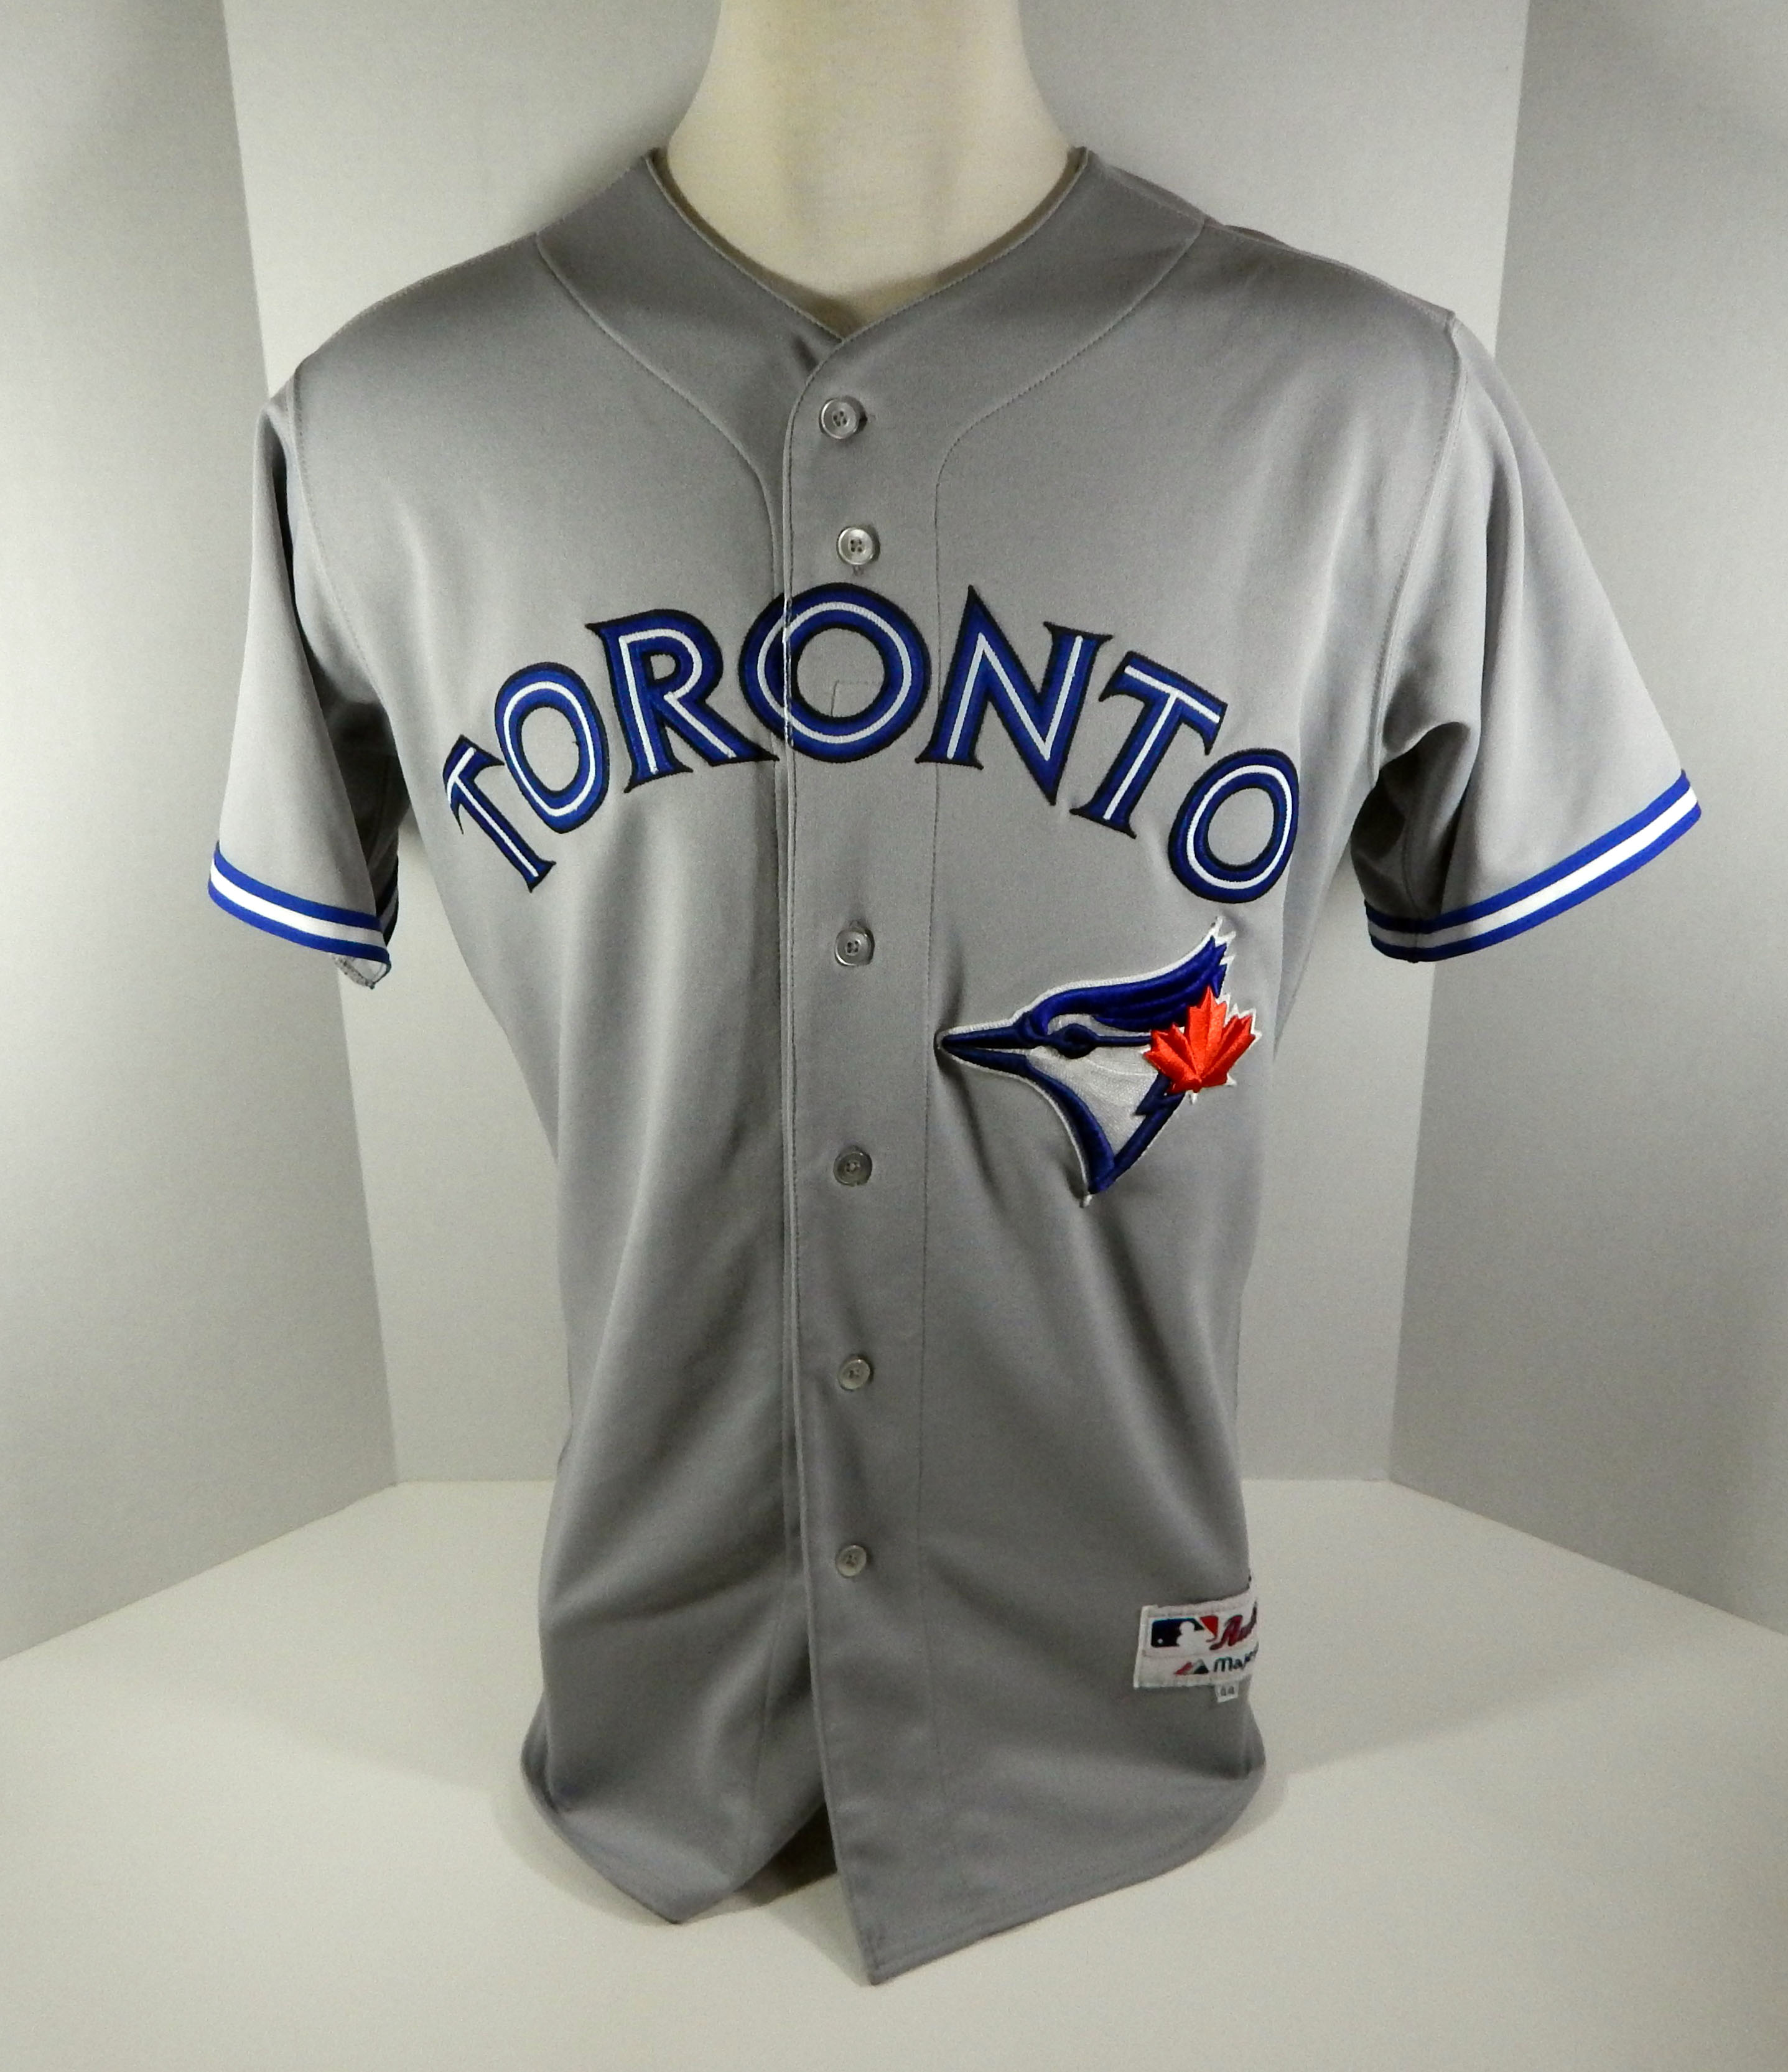 jays grey jersey Online Shopping for 